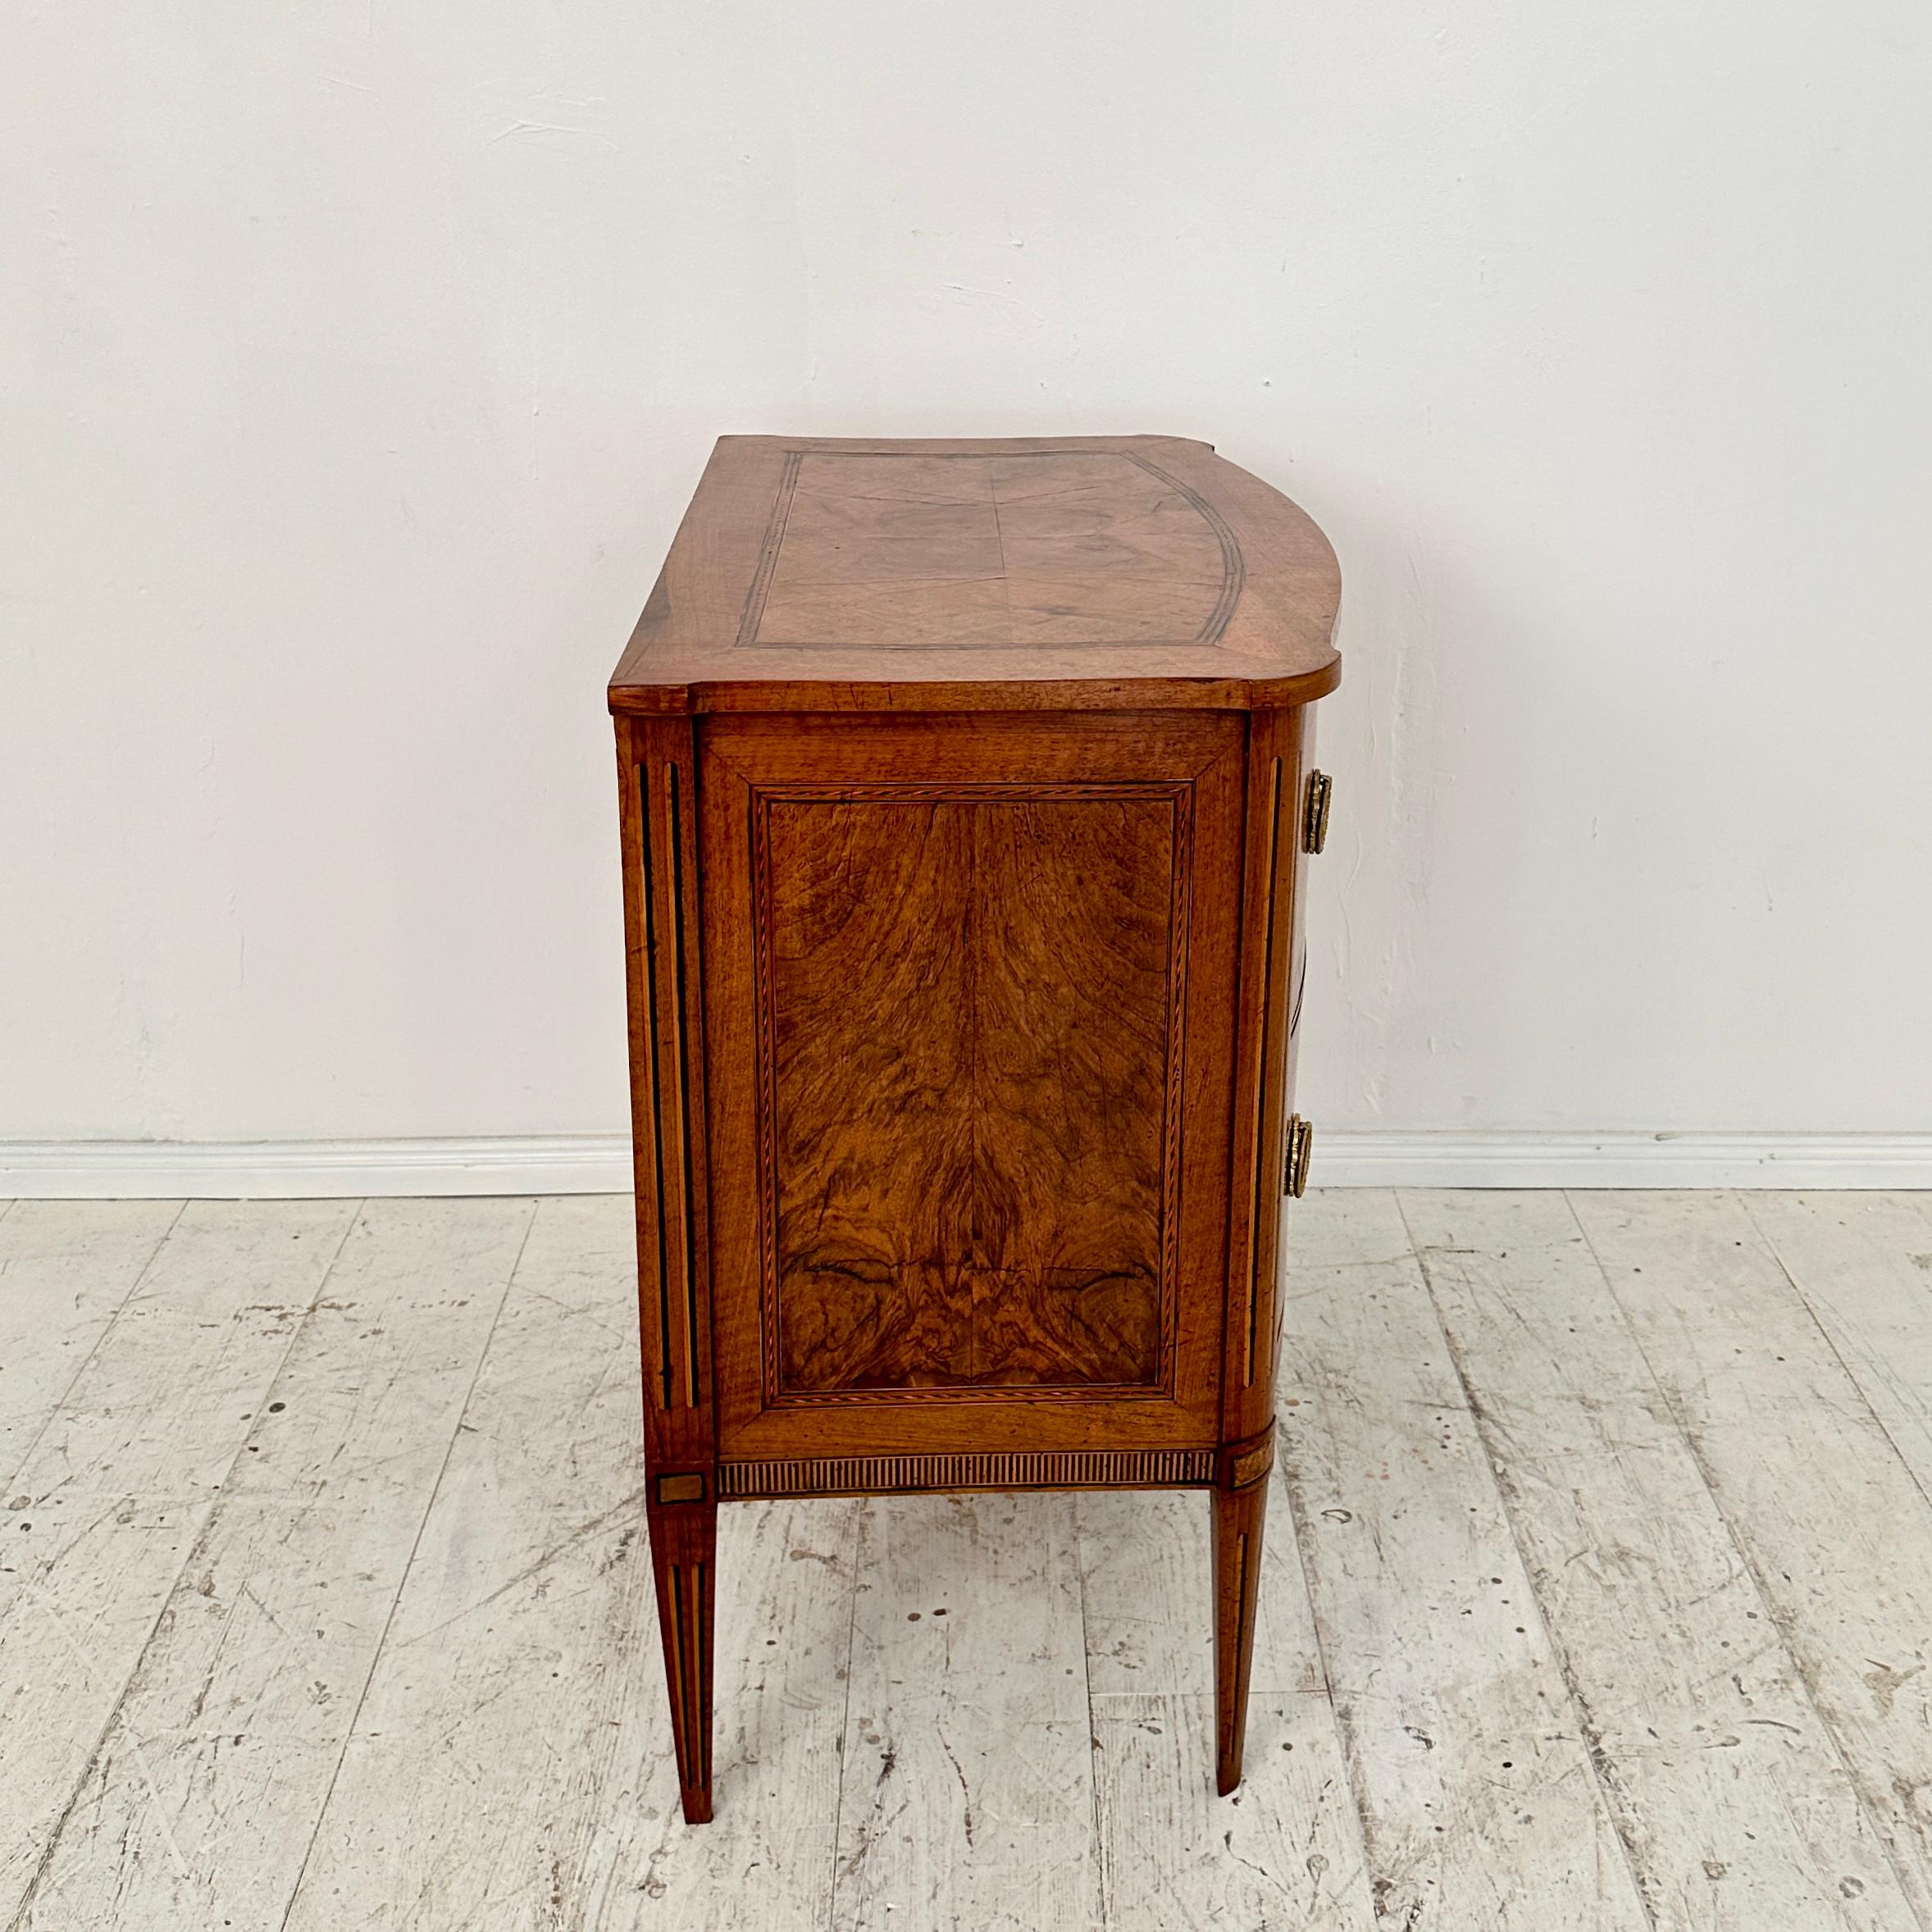 Small 18th Century German Louis Seize Commode in Walnut with 2 Drawers, 1790 For Sale 3